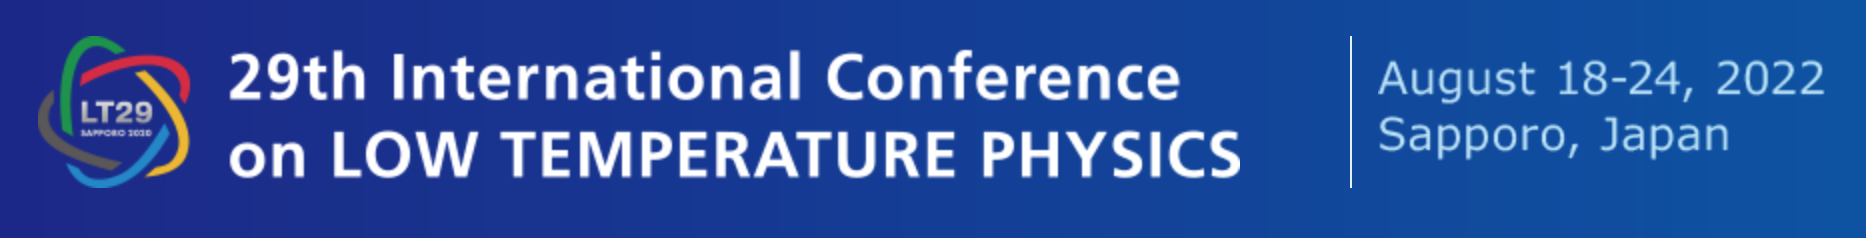 29th International Conference on Low Temperature Physics - postponed to 2022